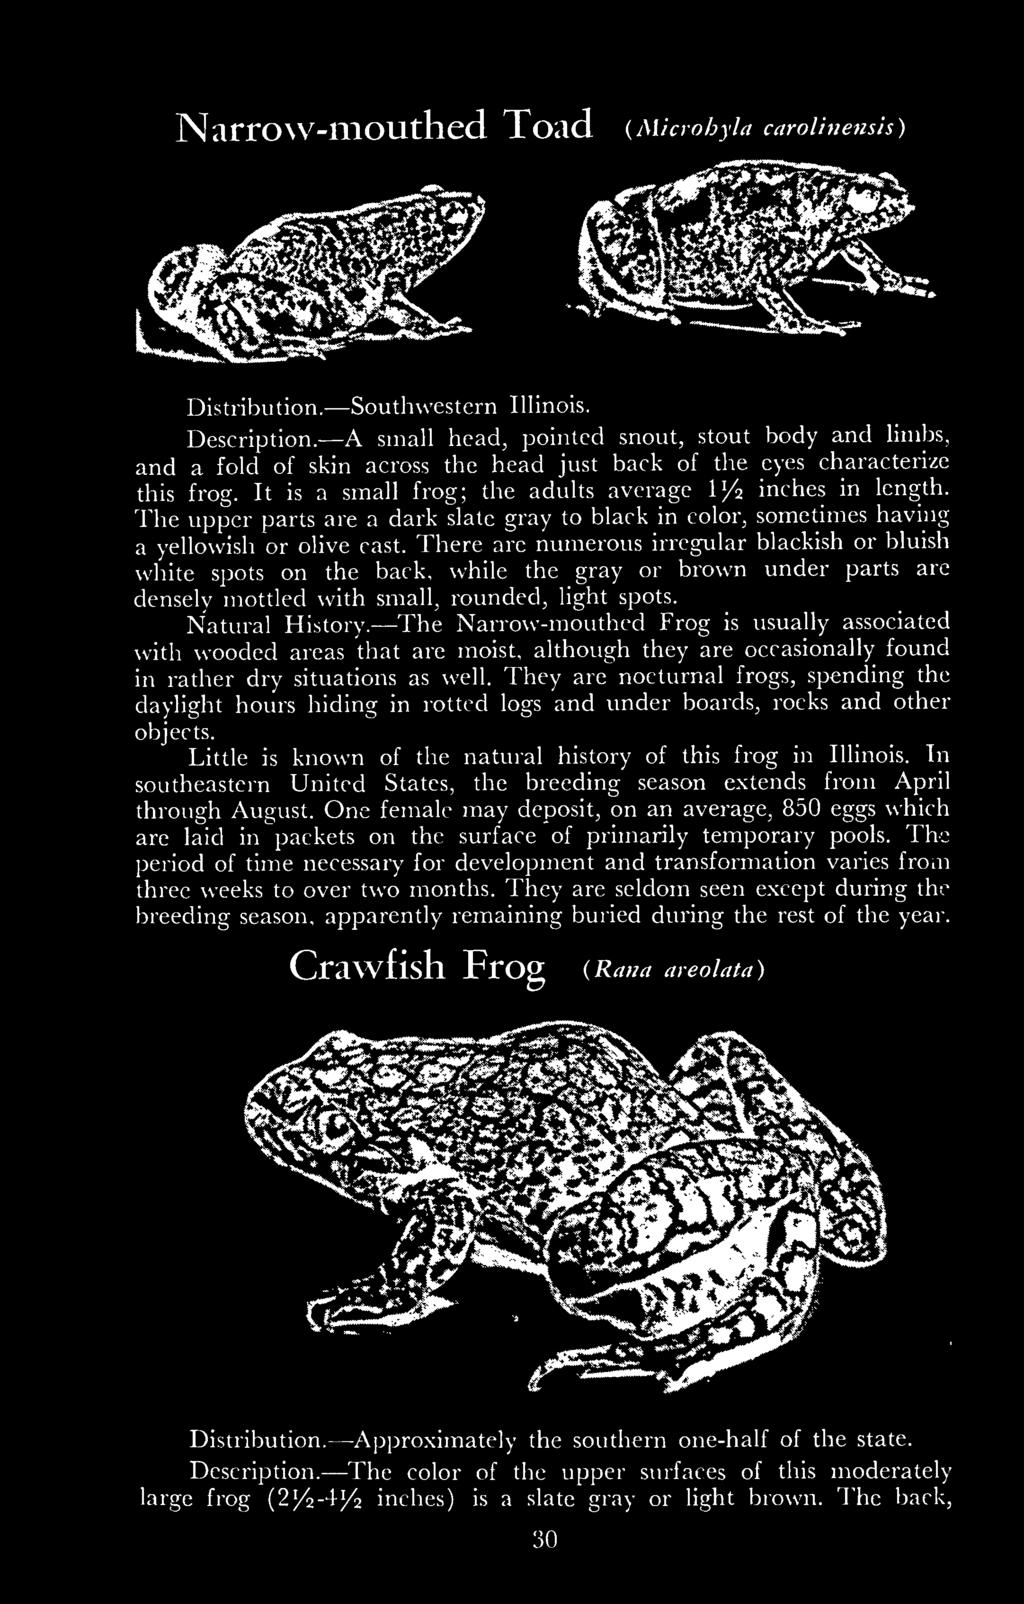 The Narrow-mouthed Frog is usually associated with wooded areas that are moist, although they are occasionally found in rather dry situations as well.